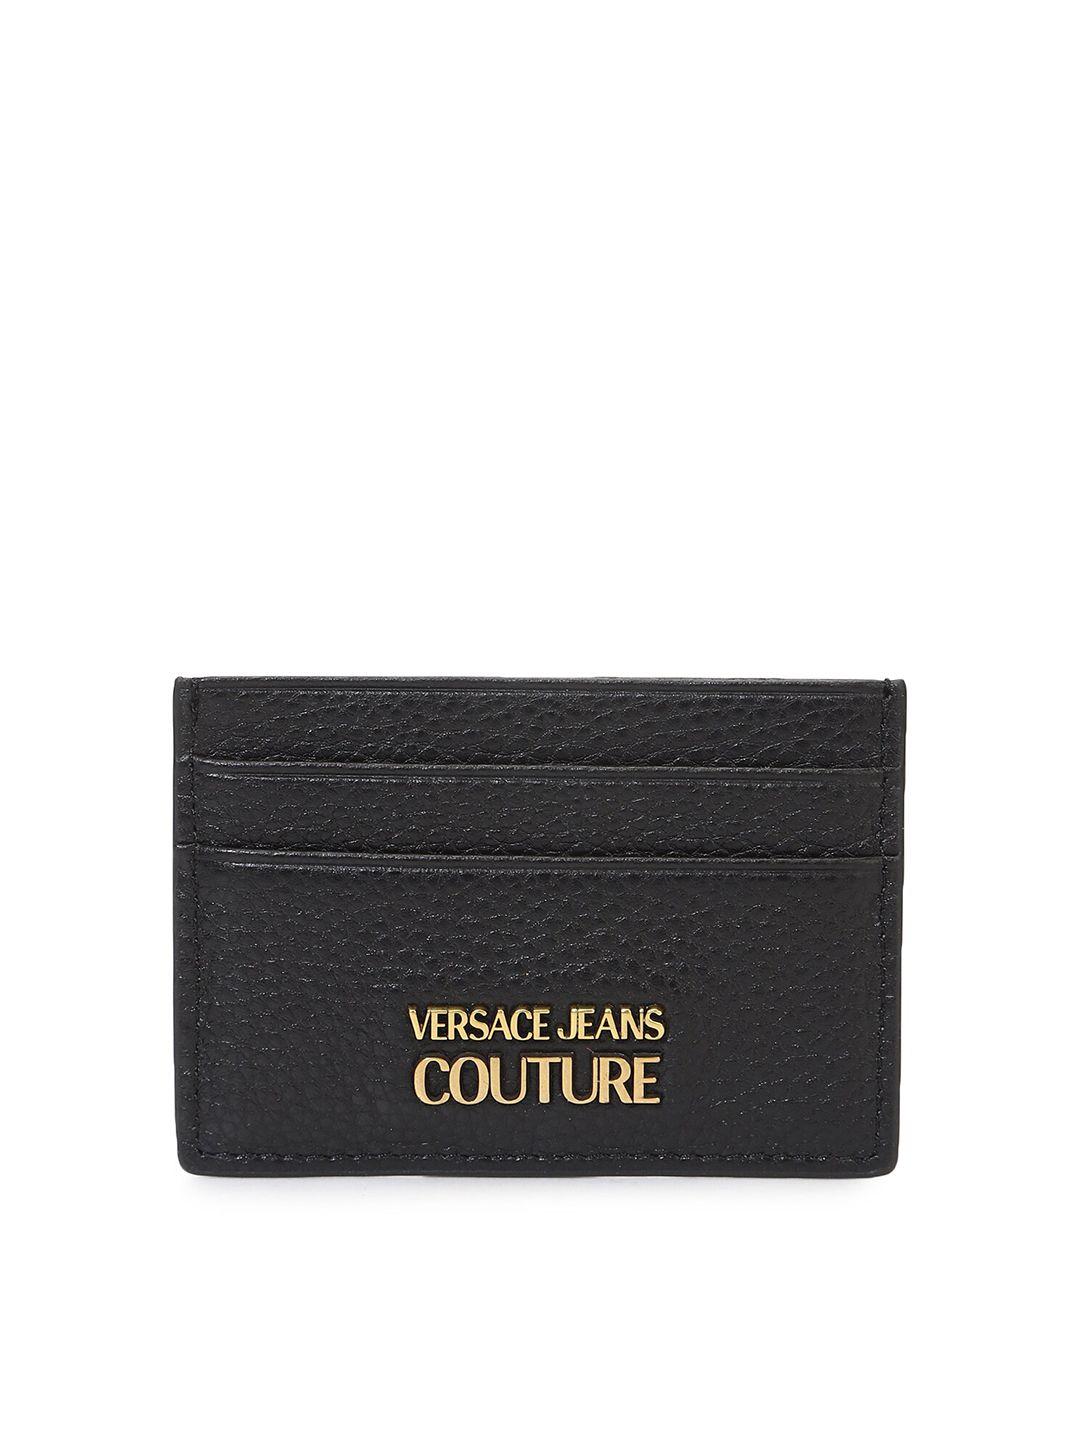 versace-jeans-couture-men-black-&-gold-toned-leather-card-holder